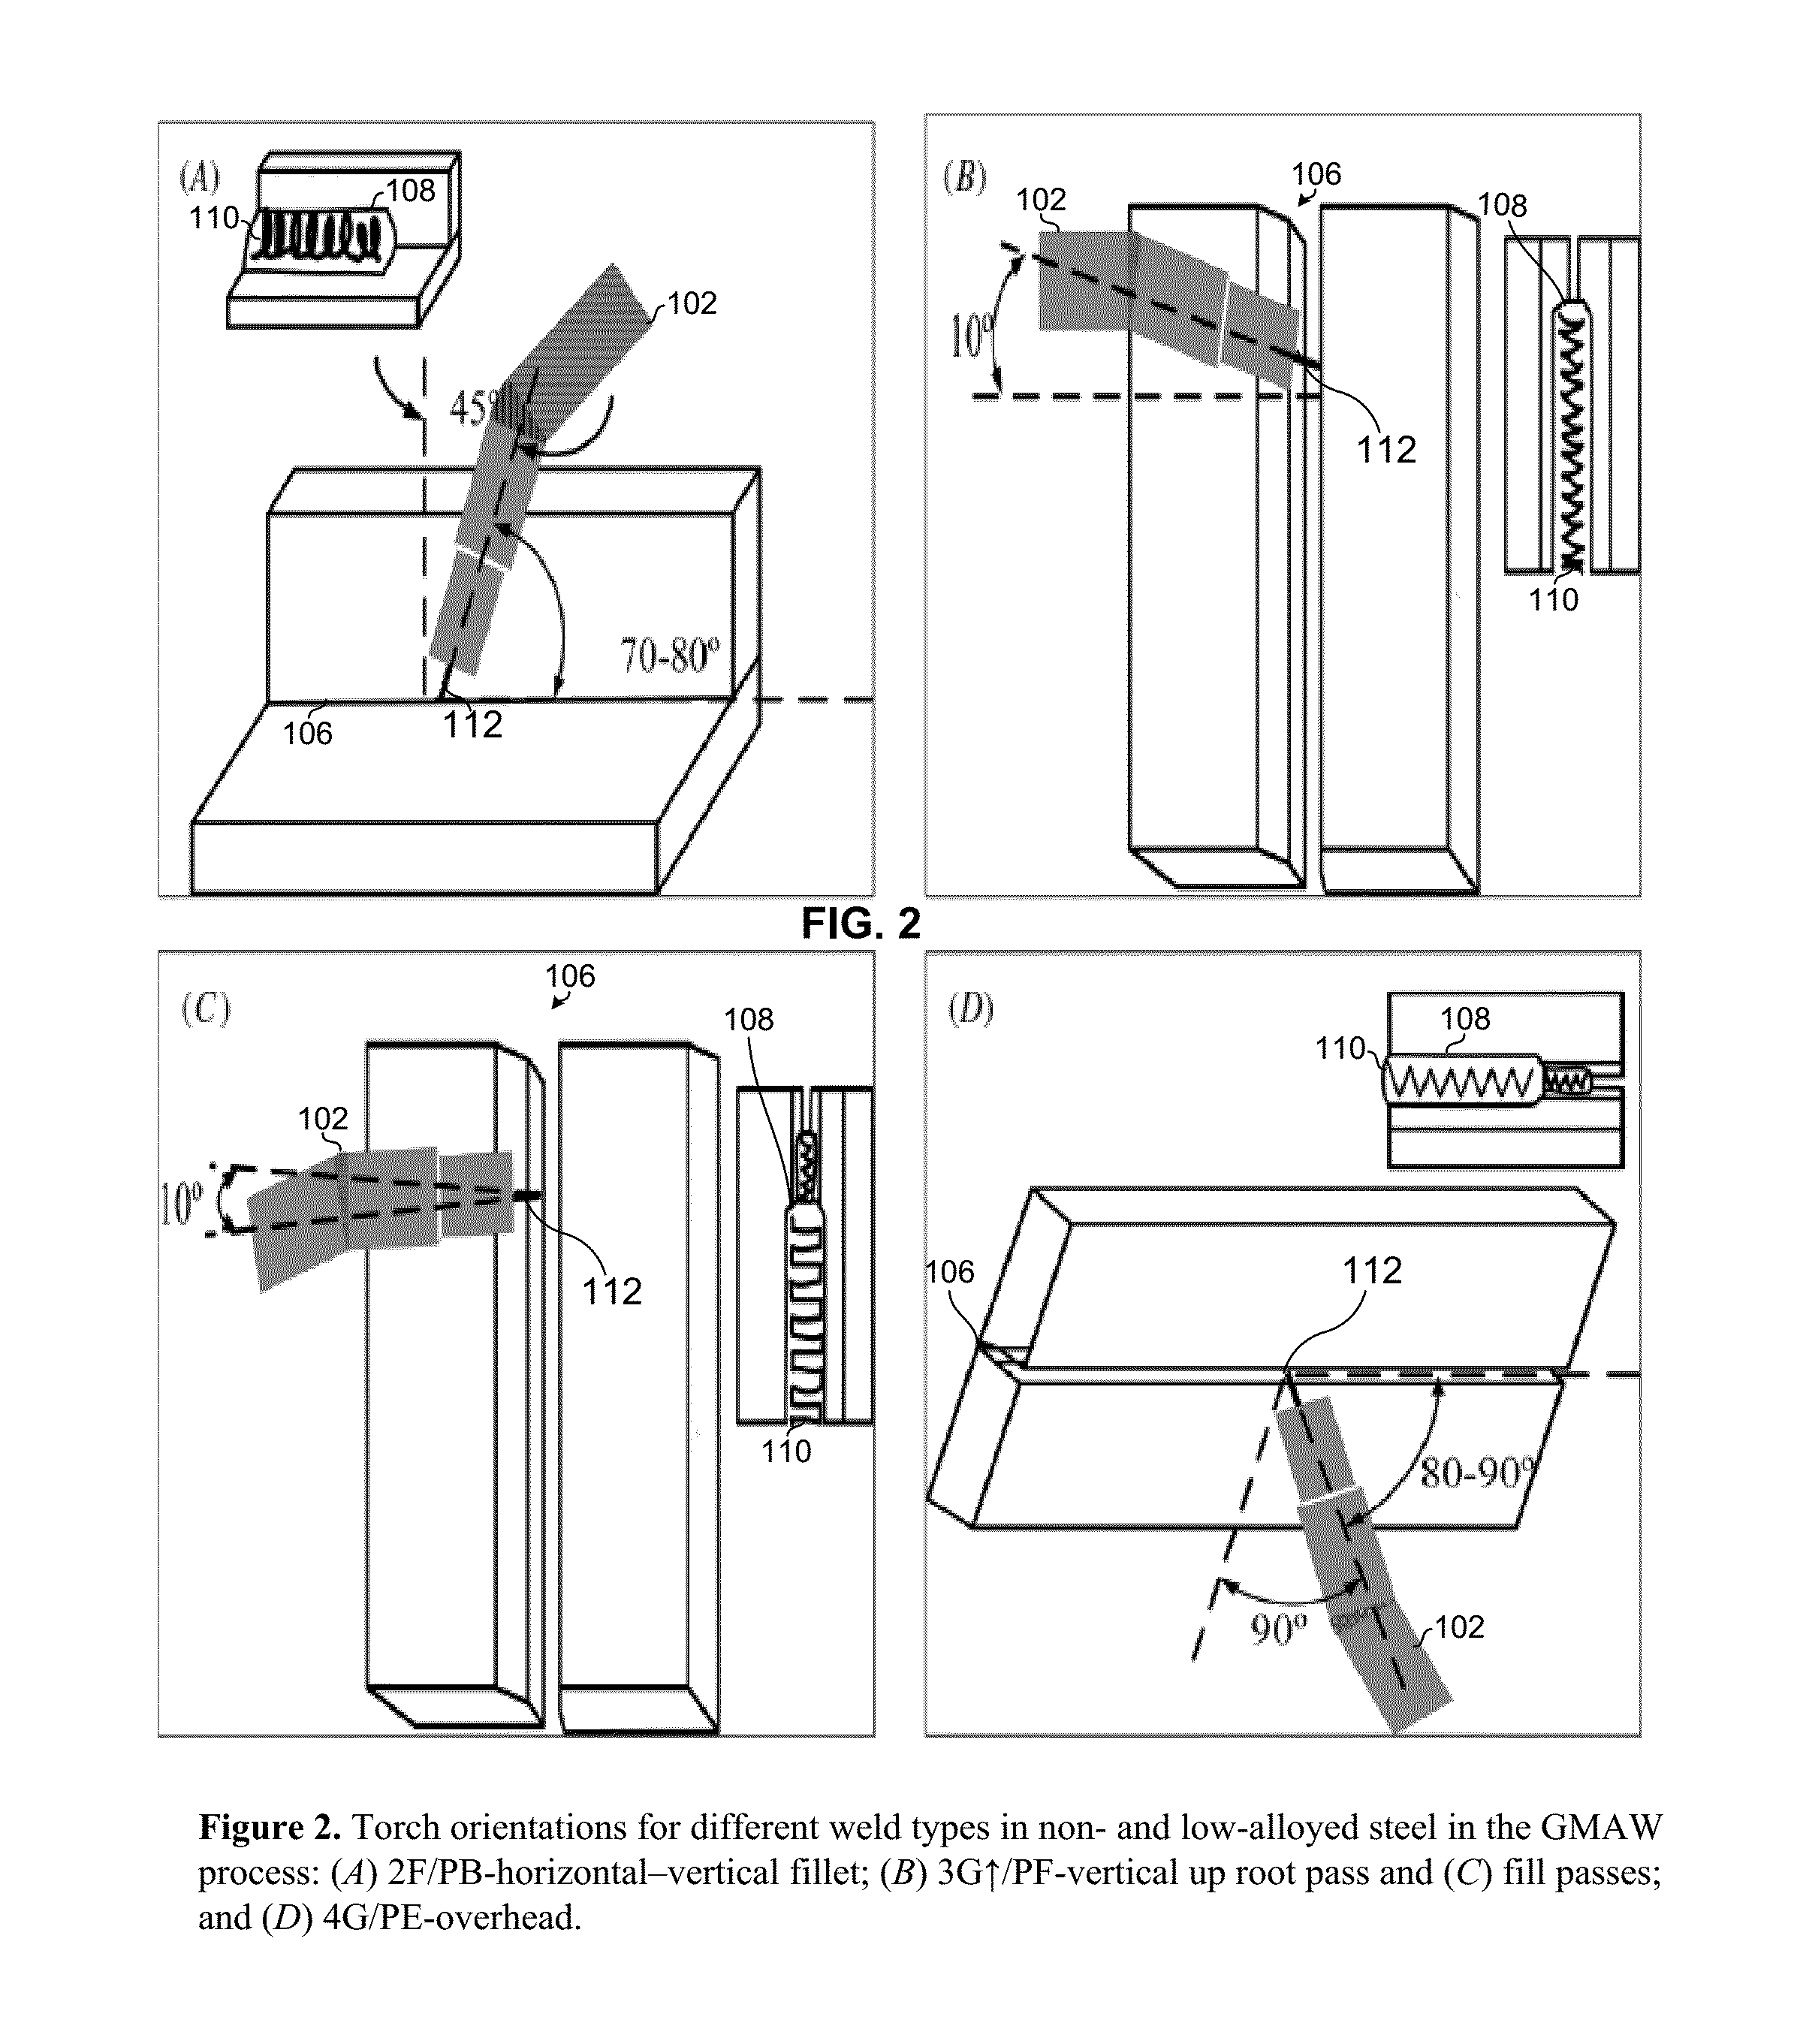 Measurement of three-dimensional welding torch orientation for manual arc welding process